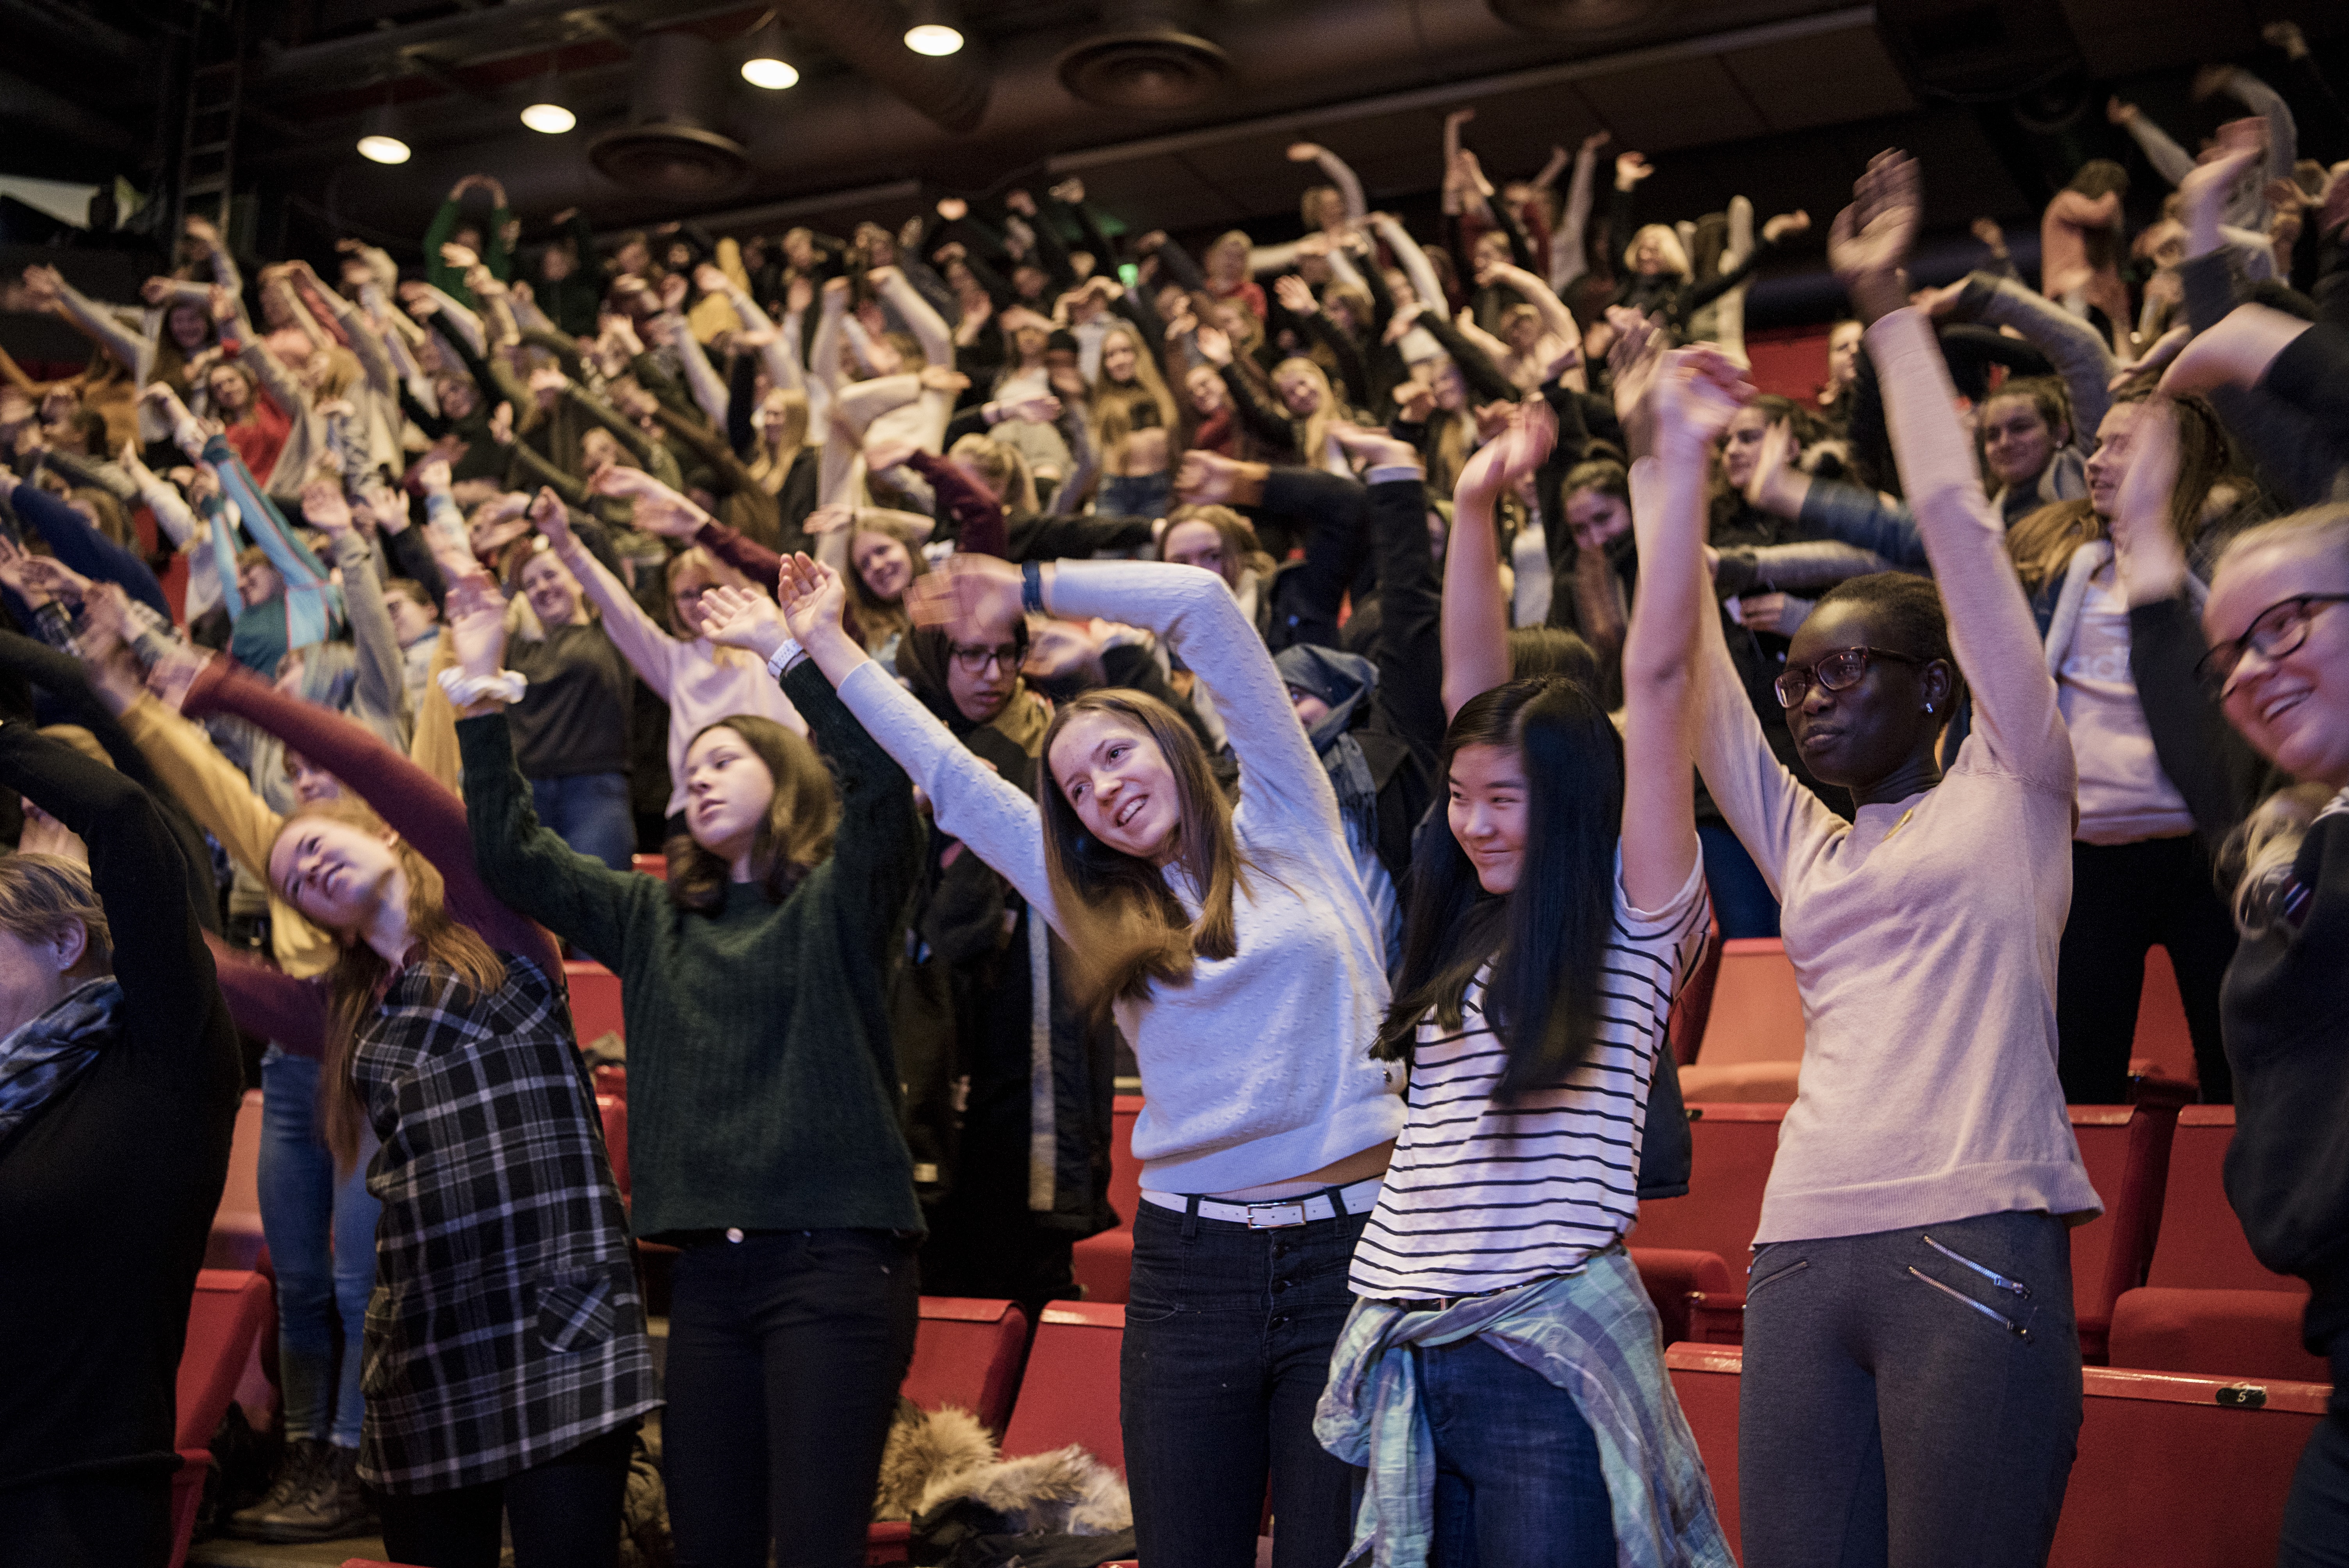 Students waving their hands in an auditorium